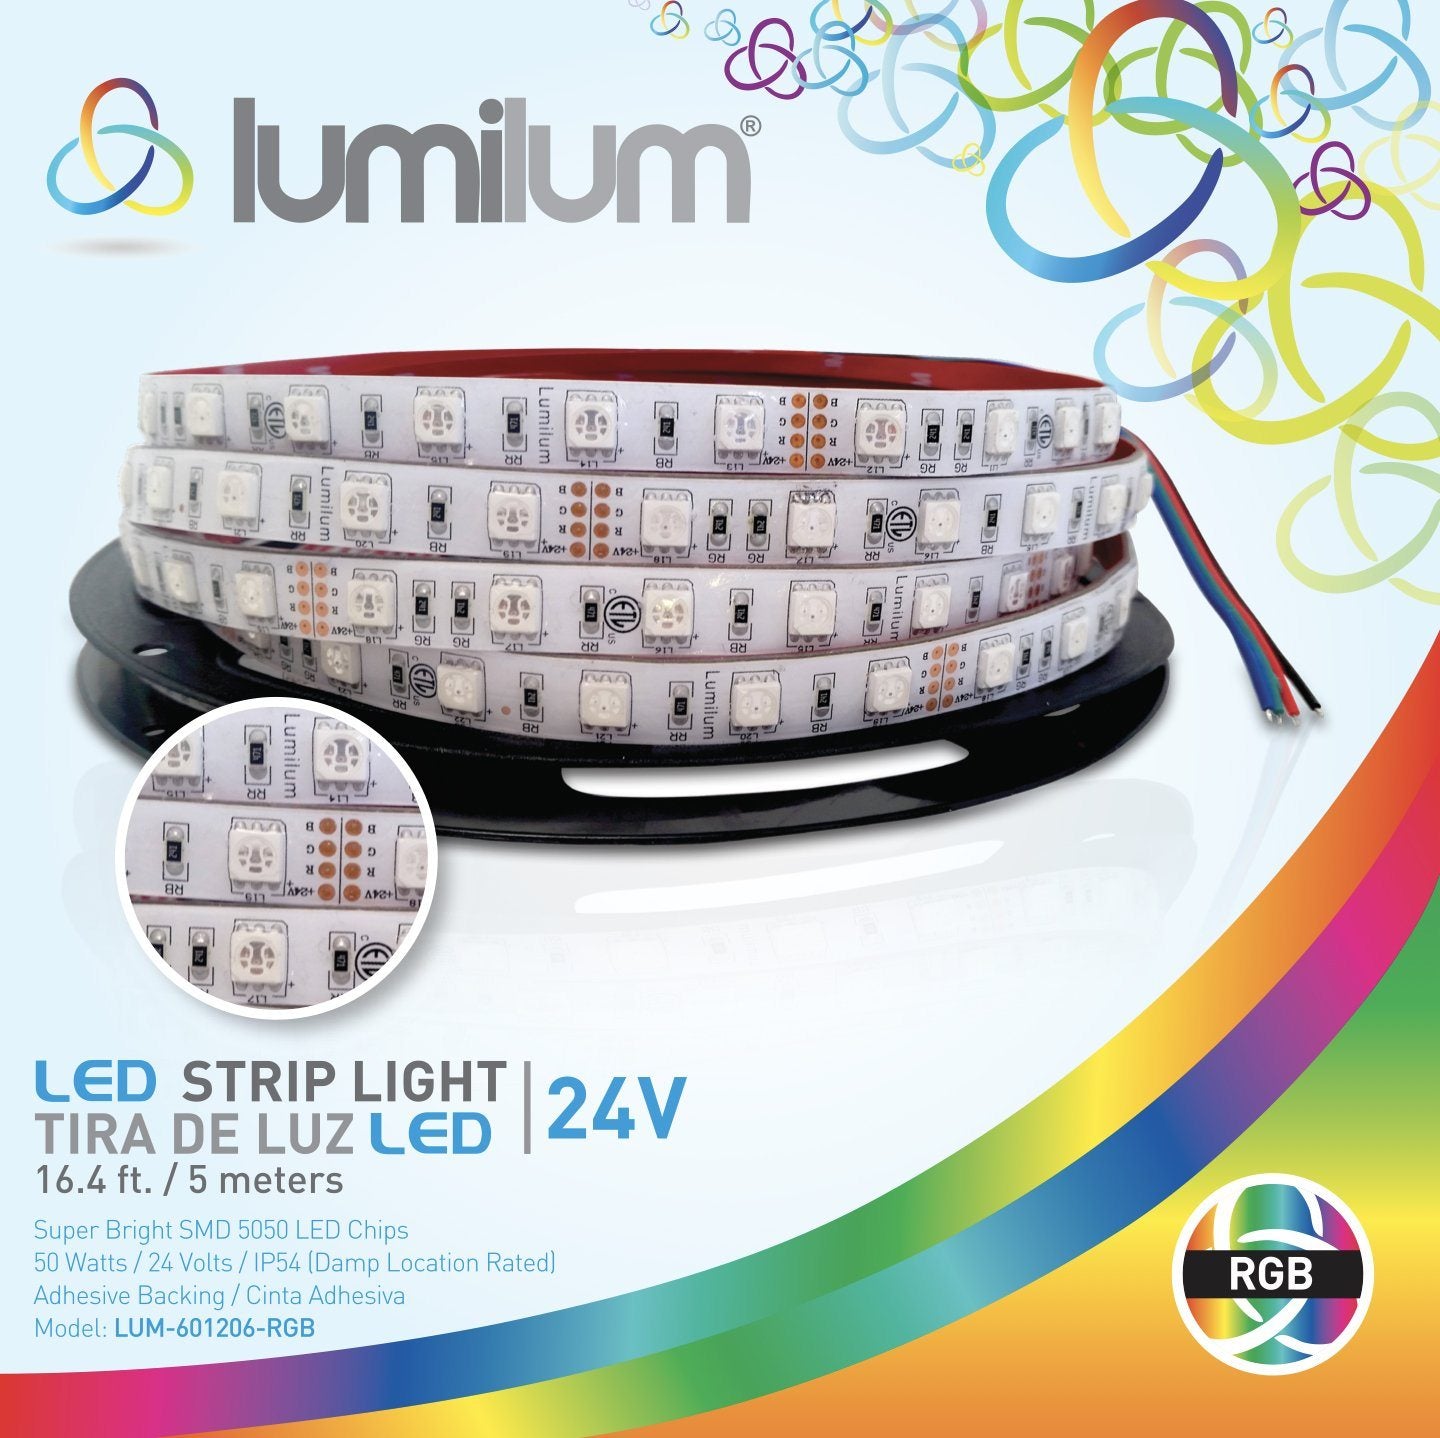 Load image into Gallery viewer, lumilum brand led strip light multicolor packaging. strip light image with white led chips
